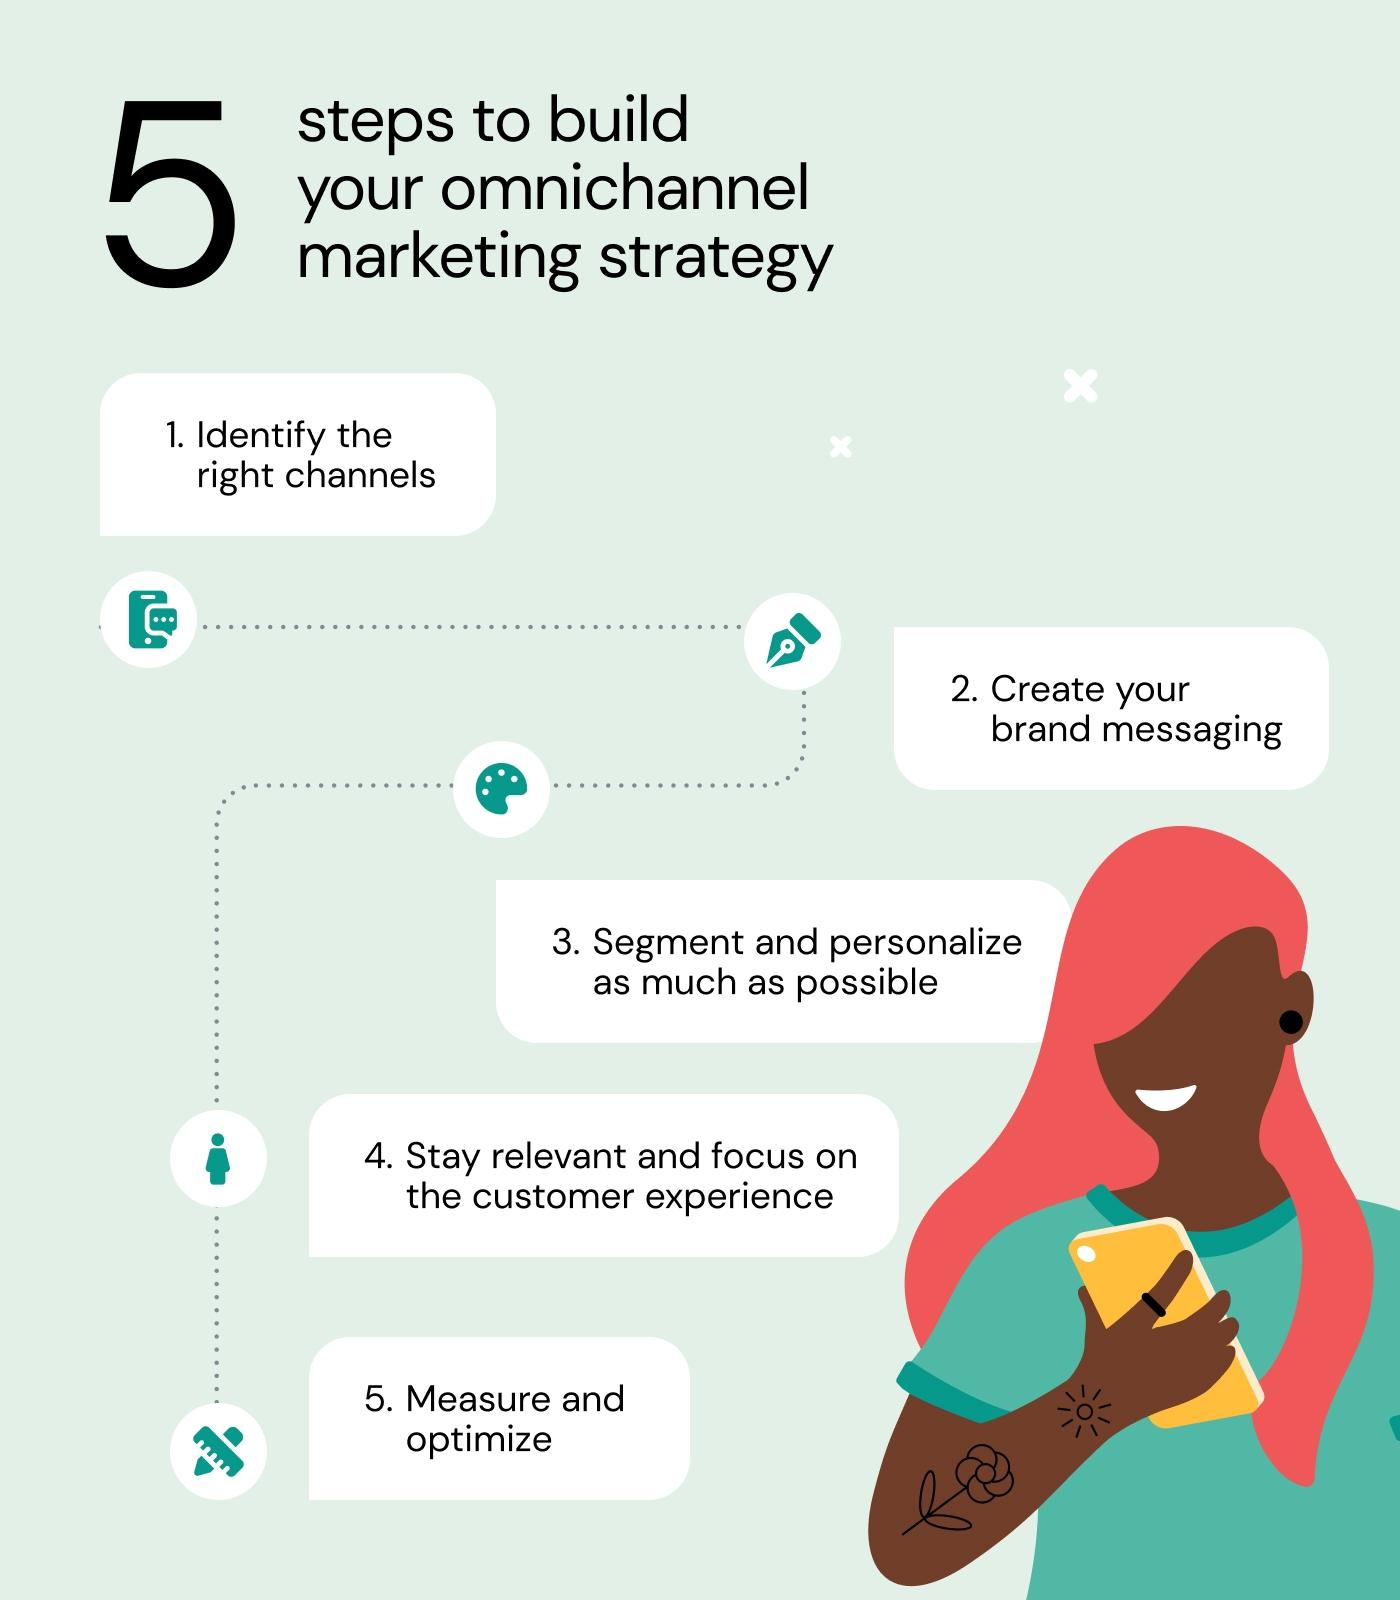 5 steps to build your omnichannel marketing strategy